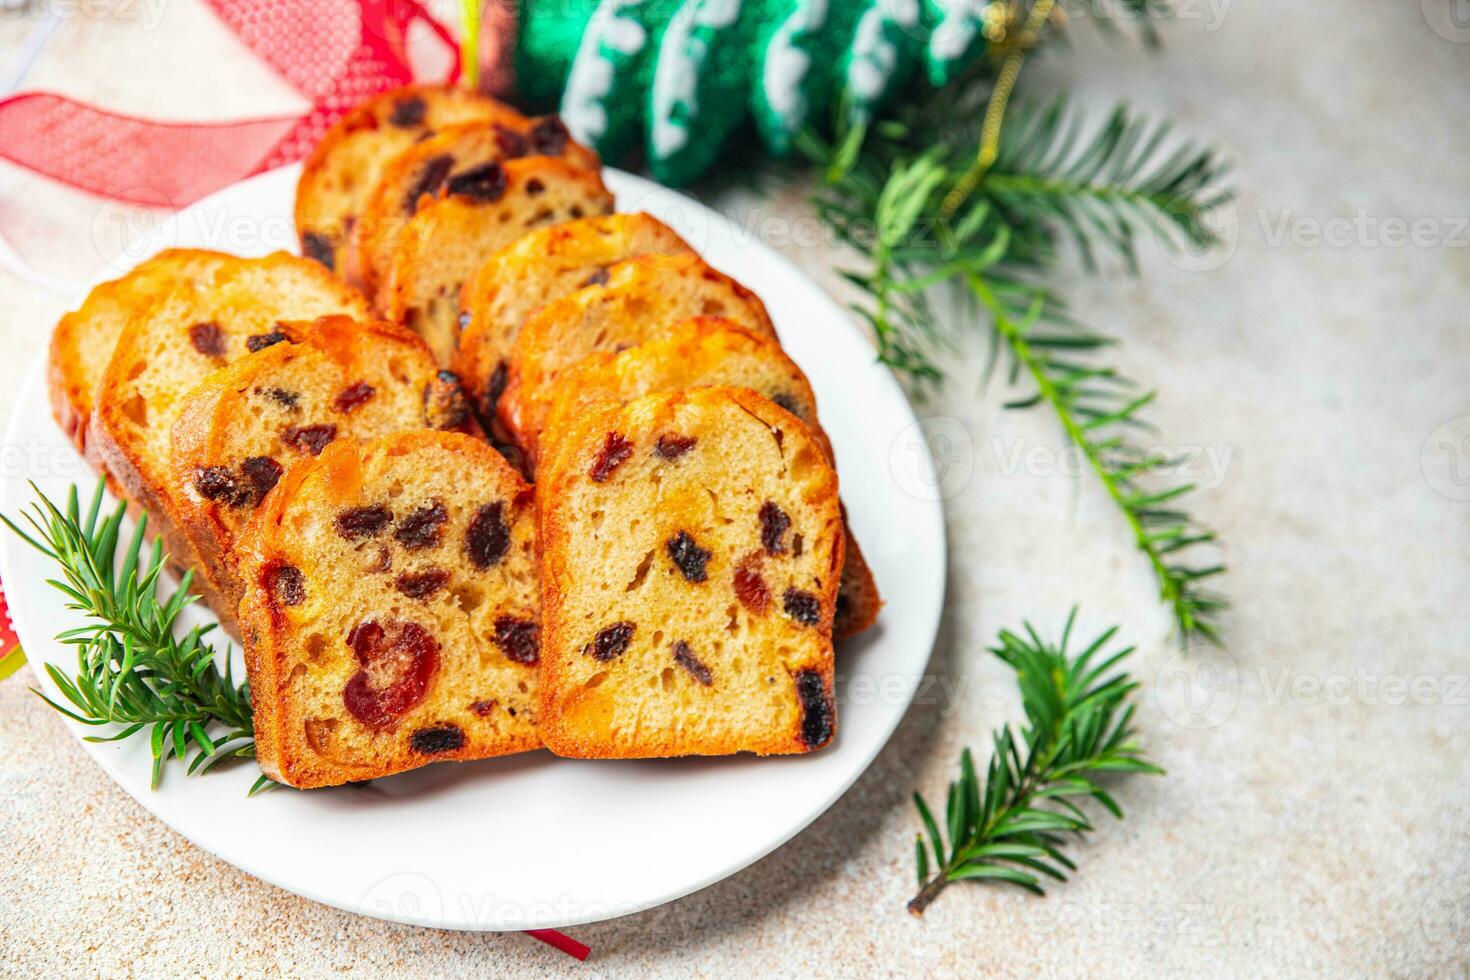 fruit cake sweet pastry dried fruits cherries, dried apricots, prunes, raisins Christmas sweet dessert holiday treat new year and christmas celebration meal food snack on the table photo